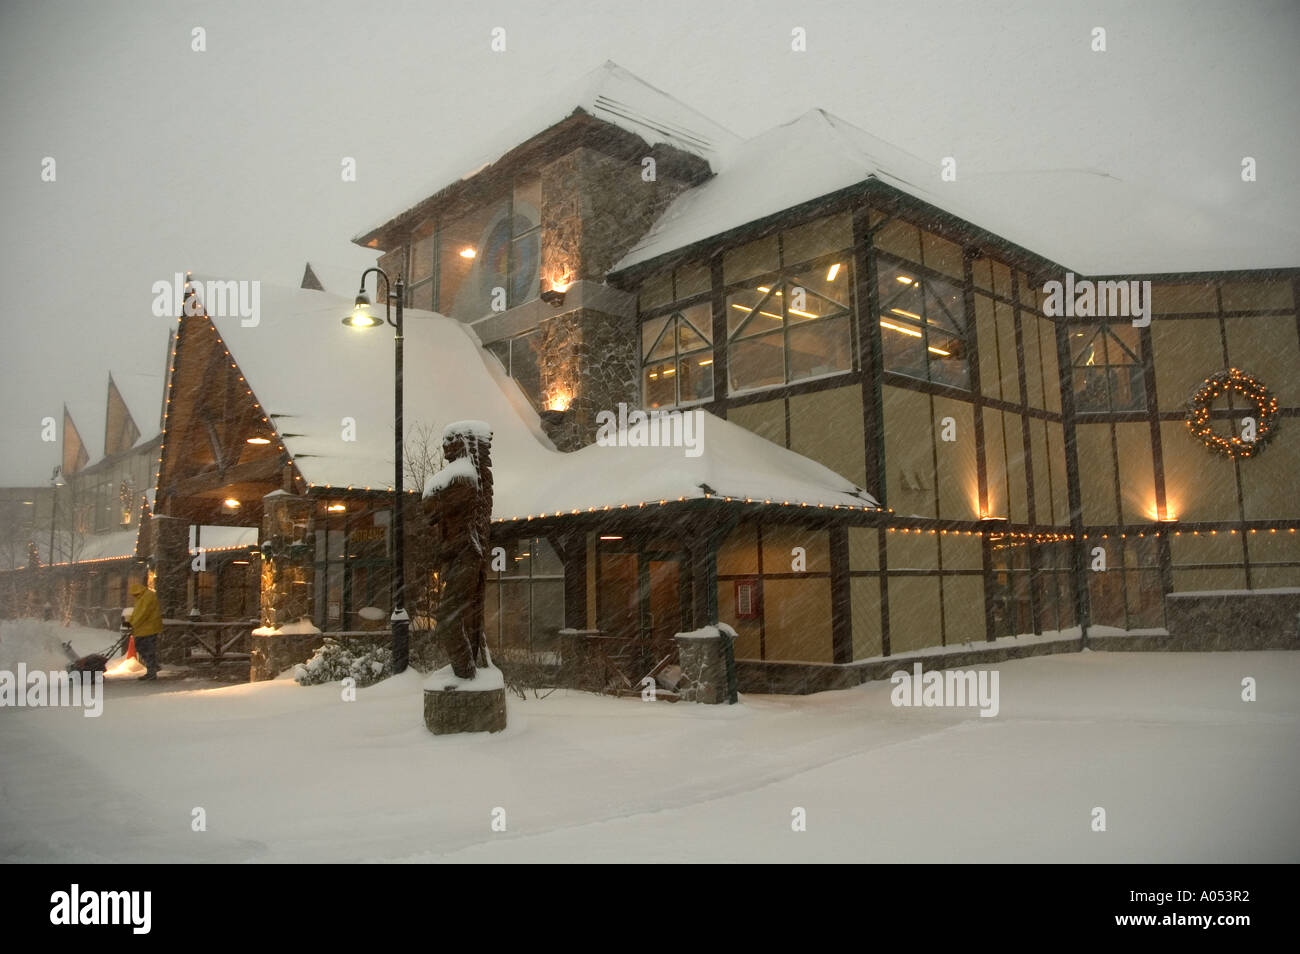 Heavy snow falls at the kittery Trading Post in Kittery, Maine. Stock Photo